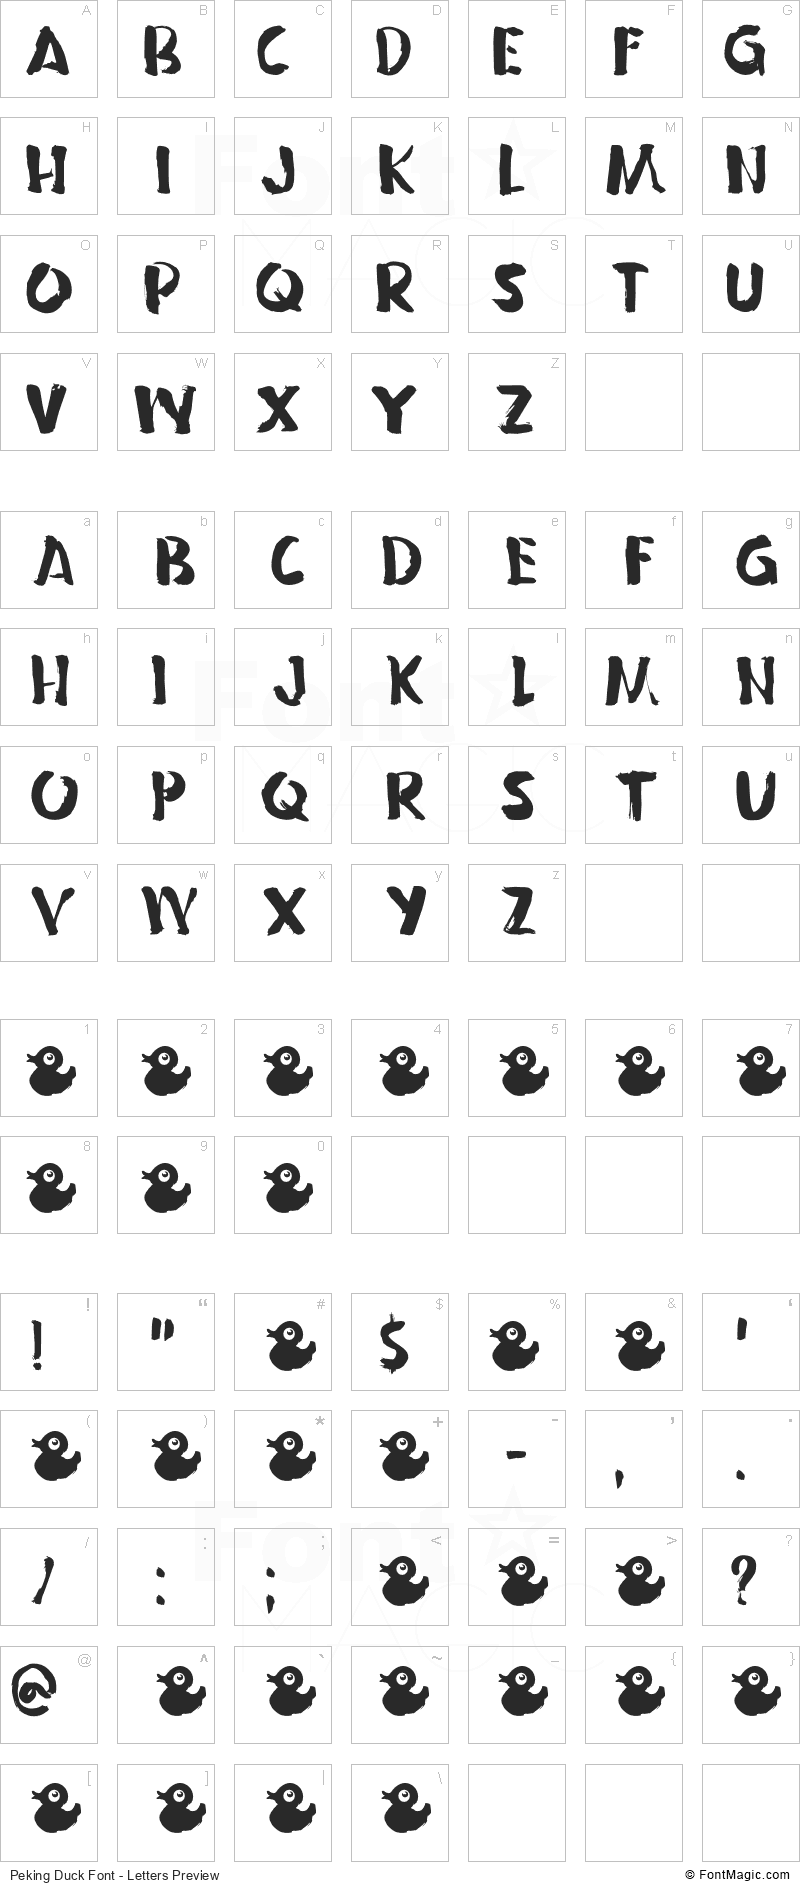 Peking Duck Font - All Latters Preview Chart